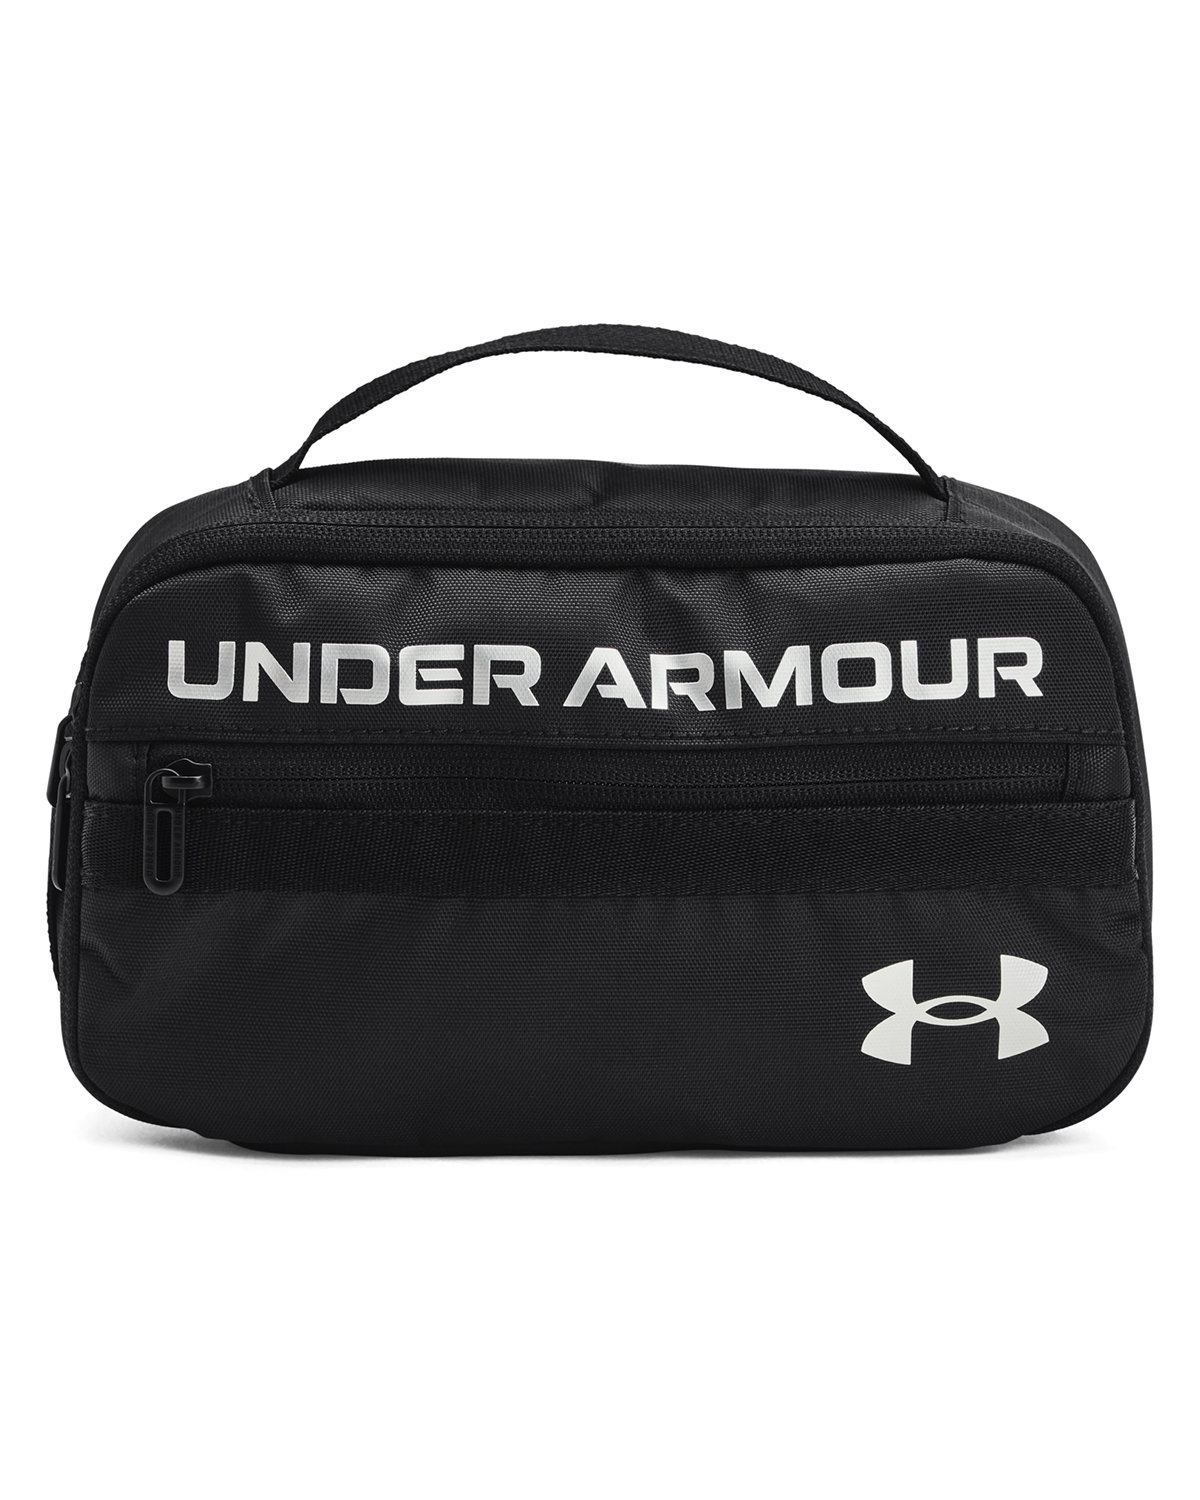 Contain Travel Kit-Under Armour